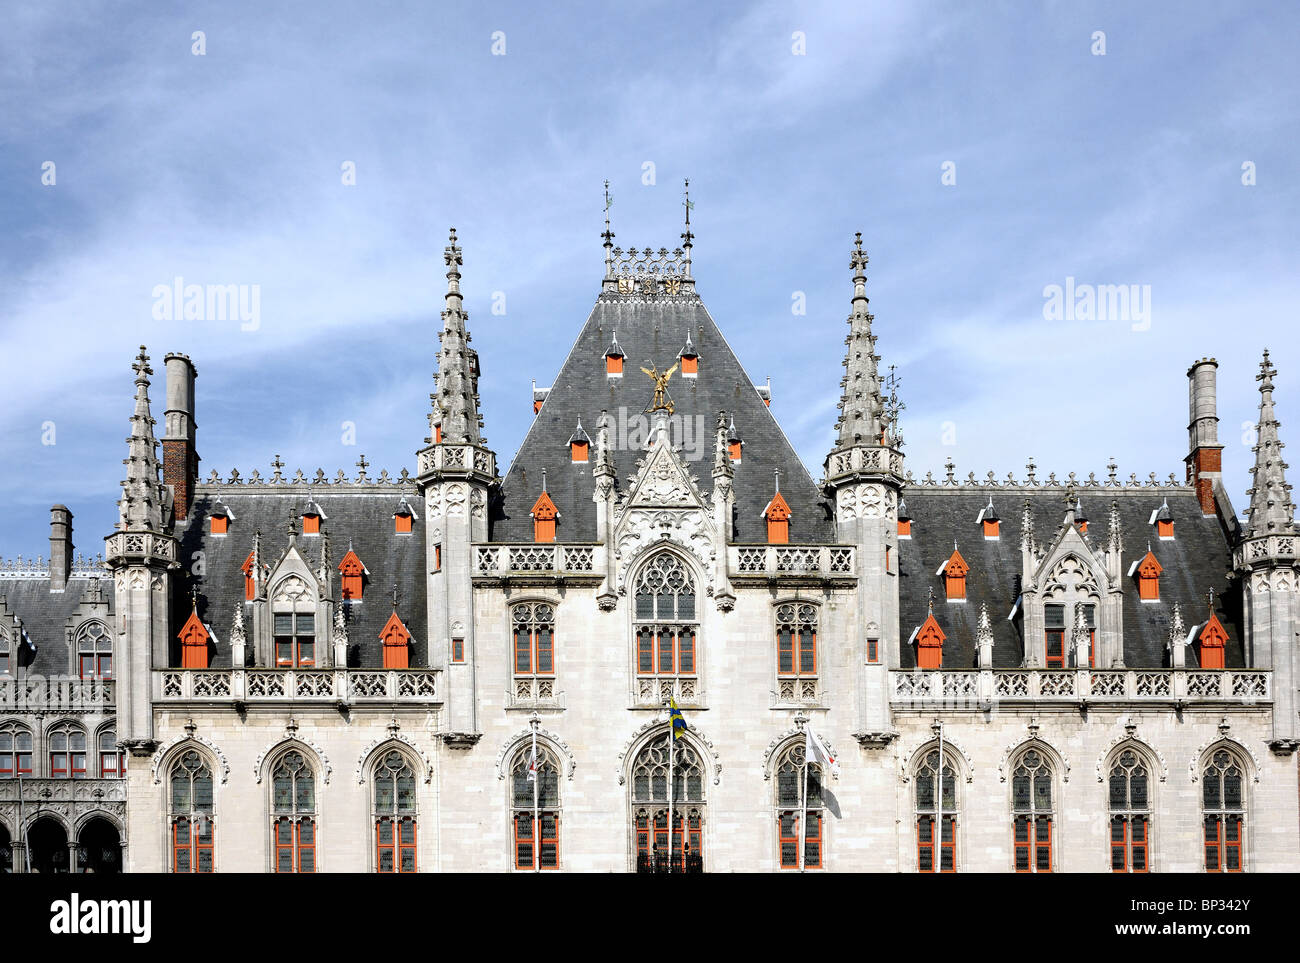 The Provincial Palace House, Market Square, Bruges, Belgium Stock Photo